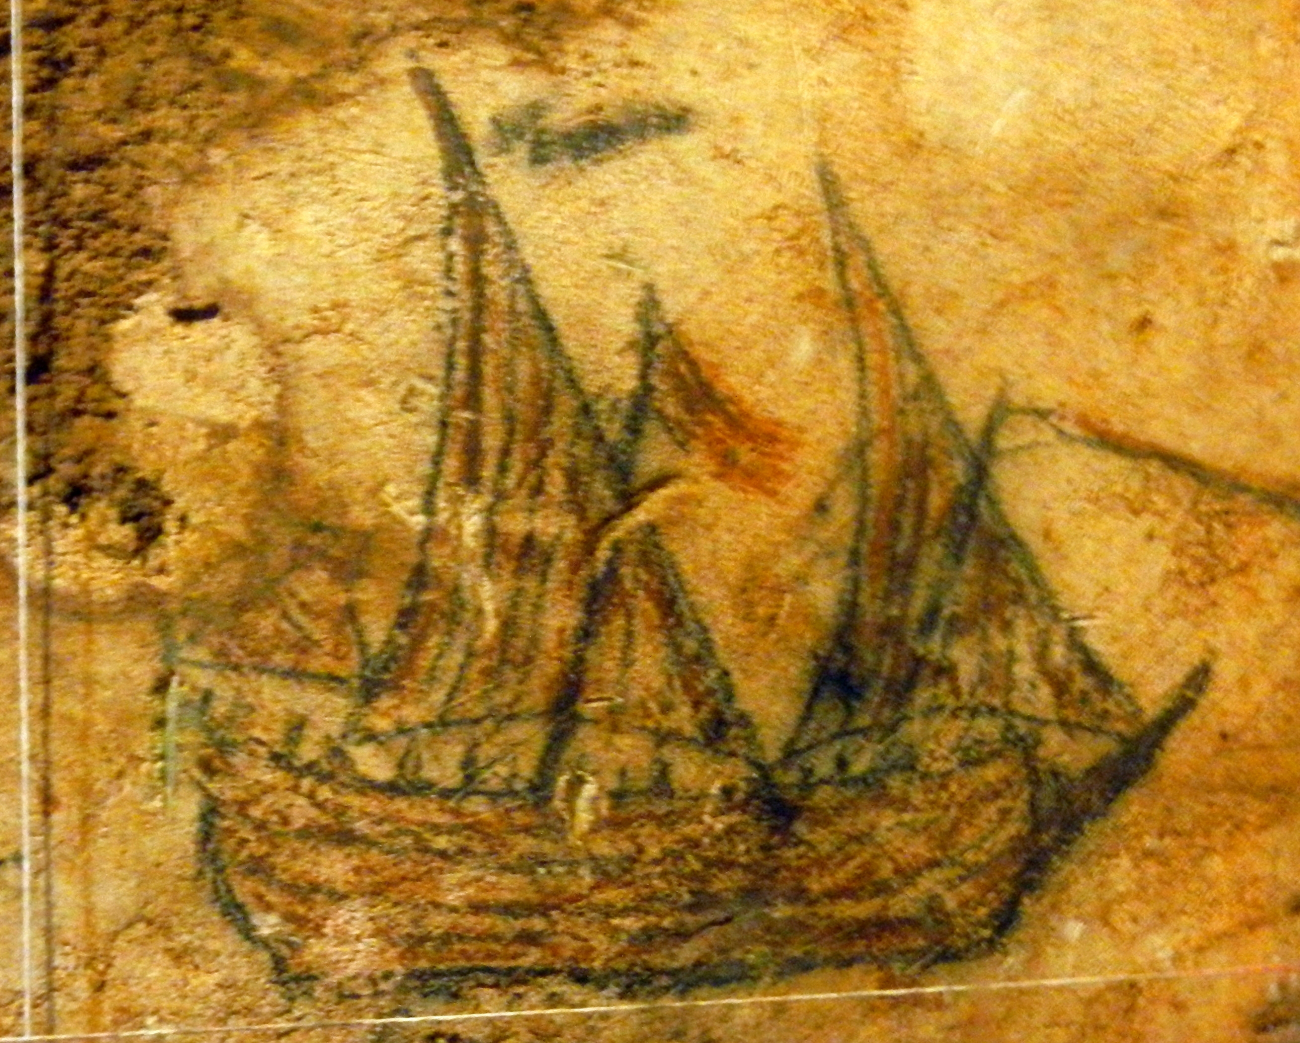 Spanish caravel drawn on wall of El Morro dungeon